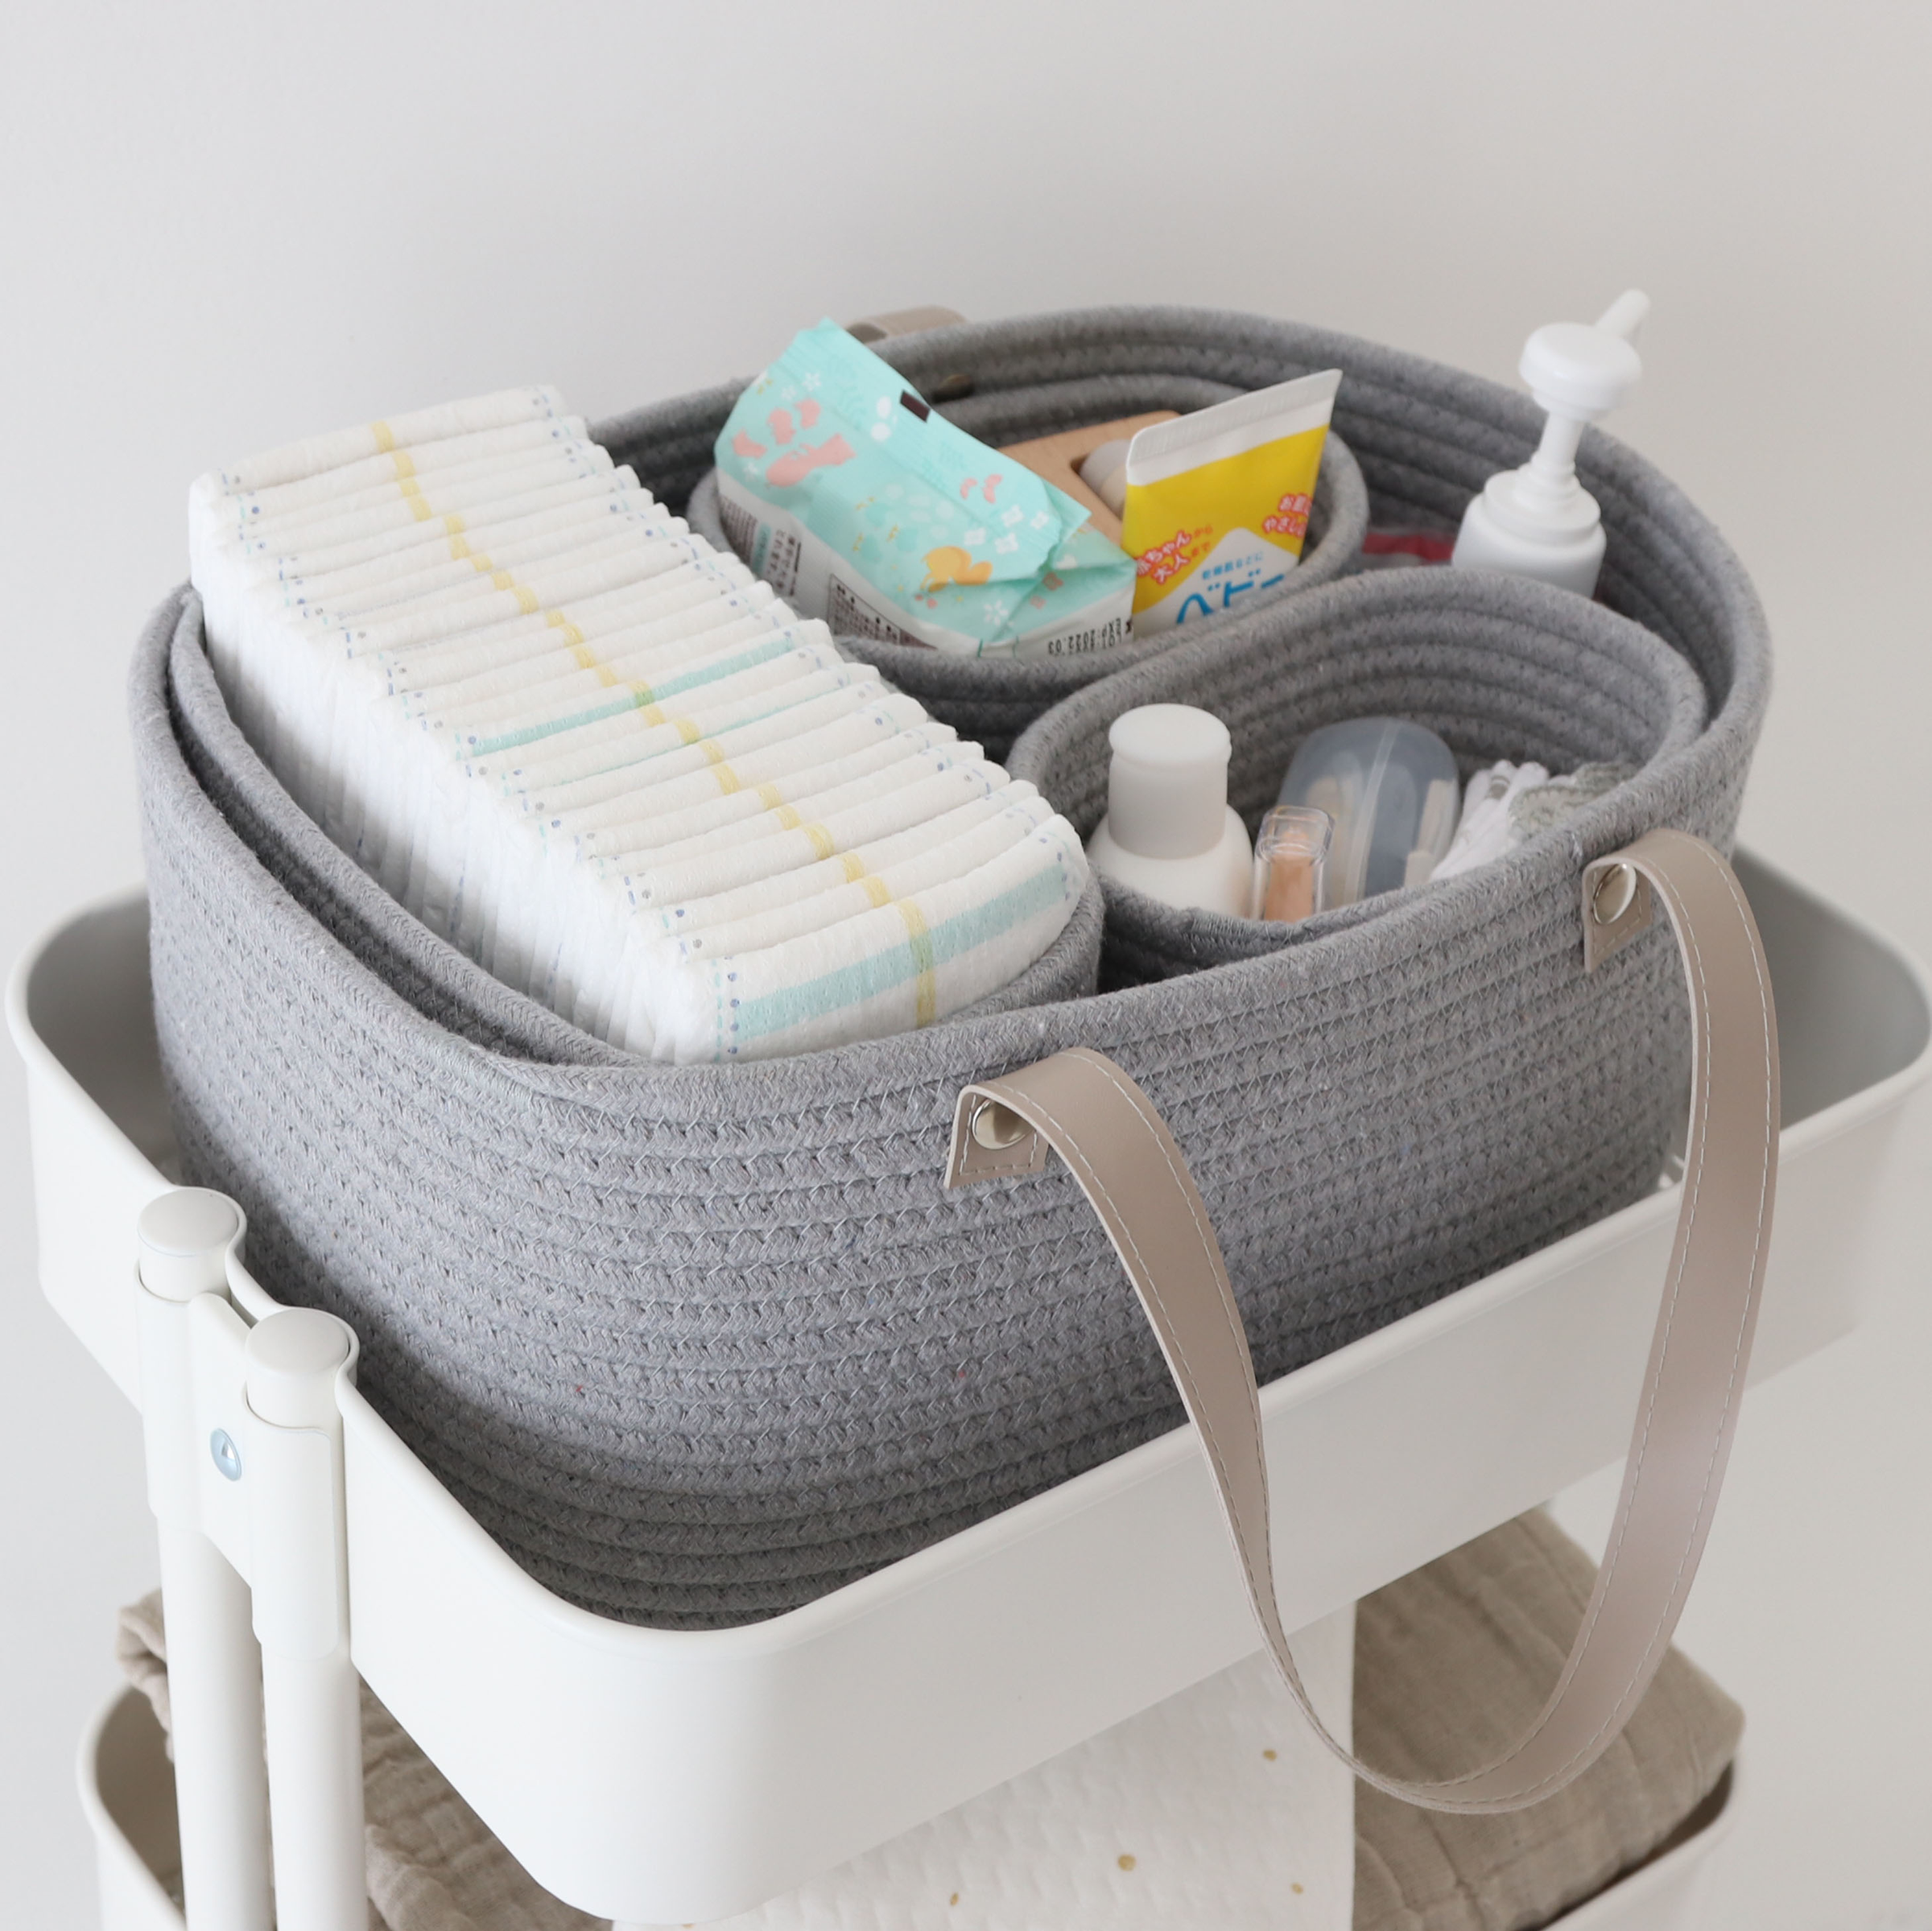 Baby wipe & Diaper changing supplies